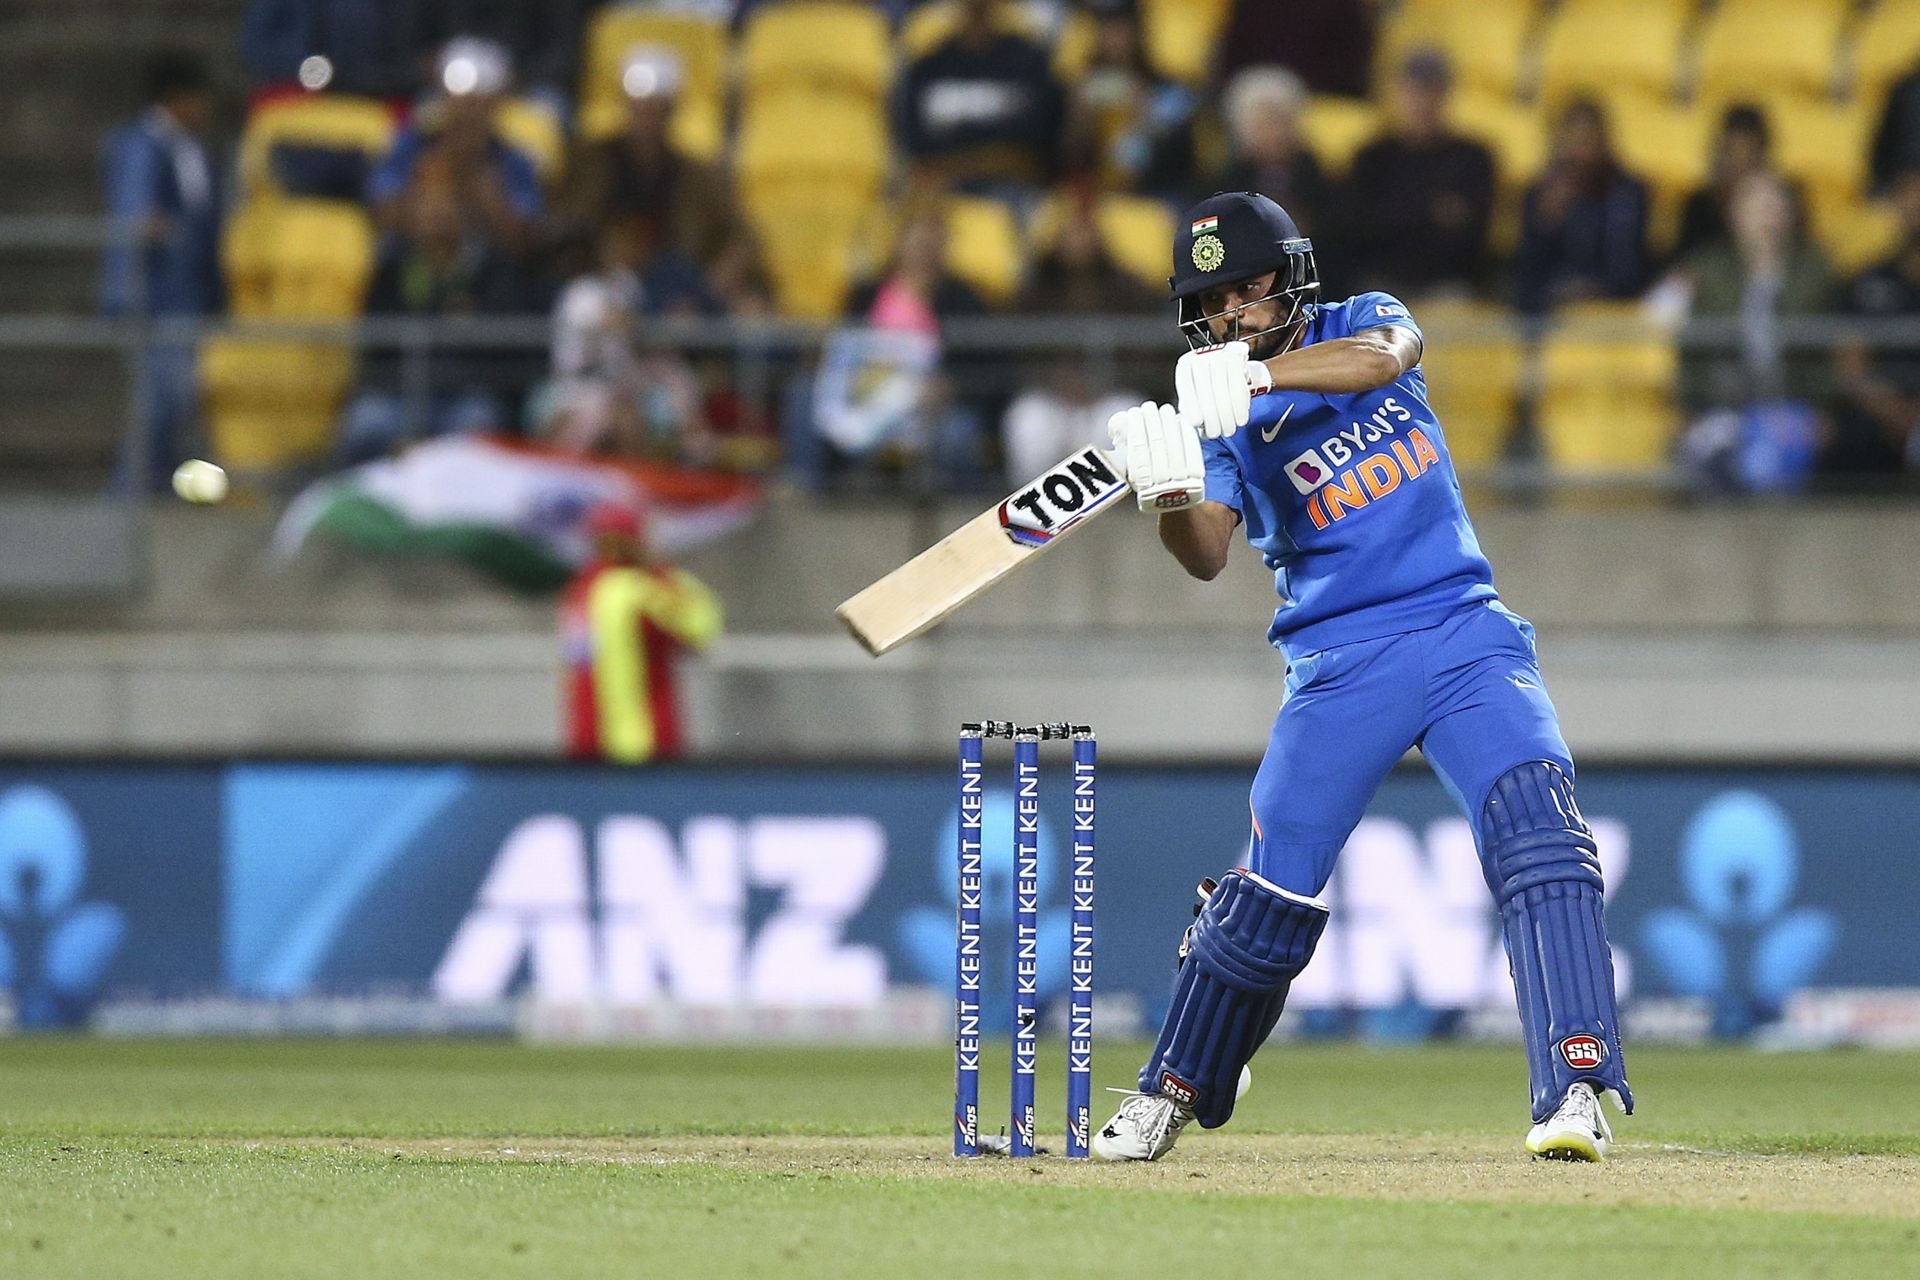 Manish Pandey bats during a T20I against New Zealand in January 2020. Pic: Getty Images